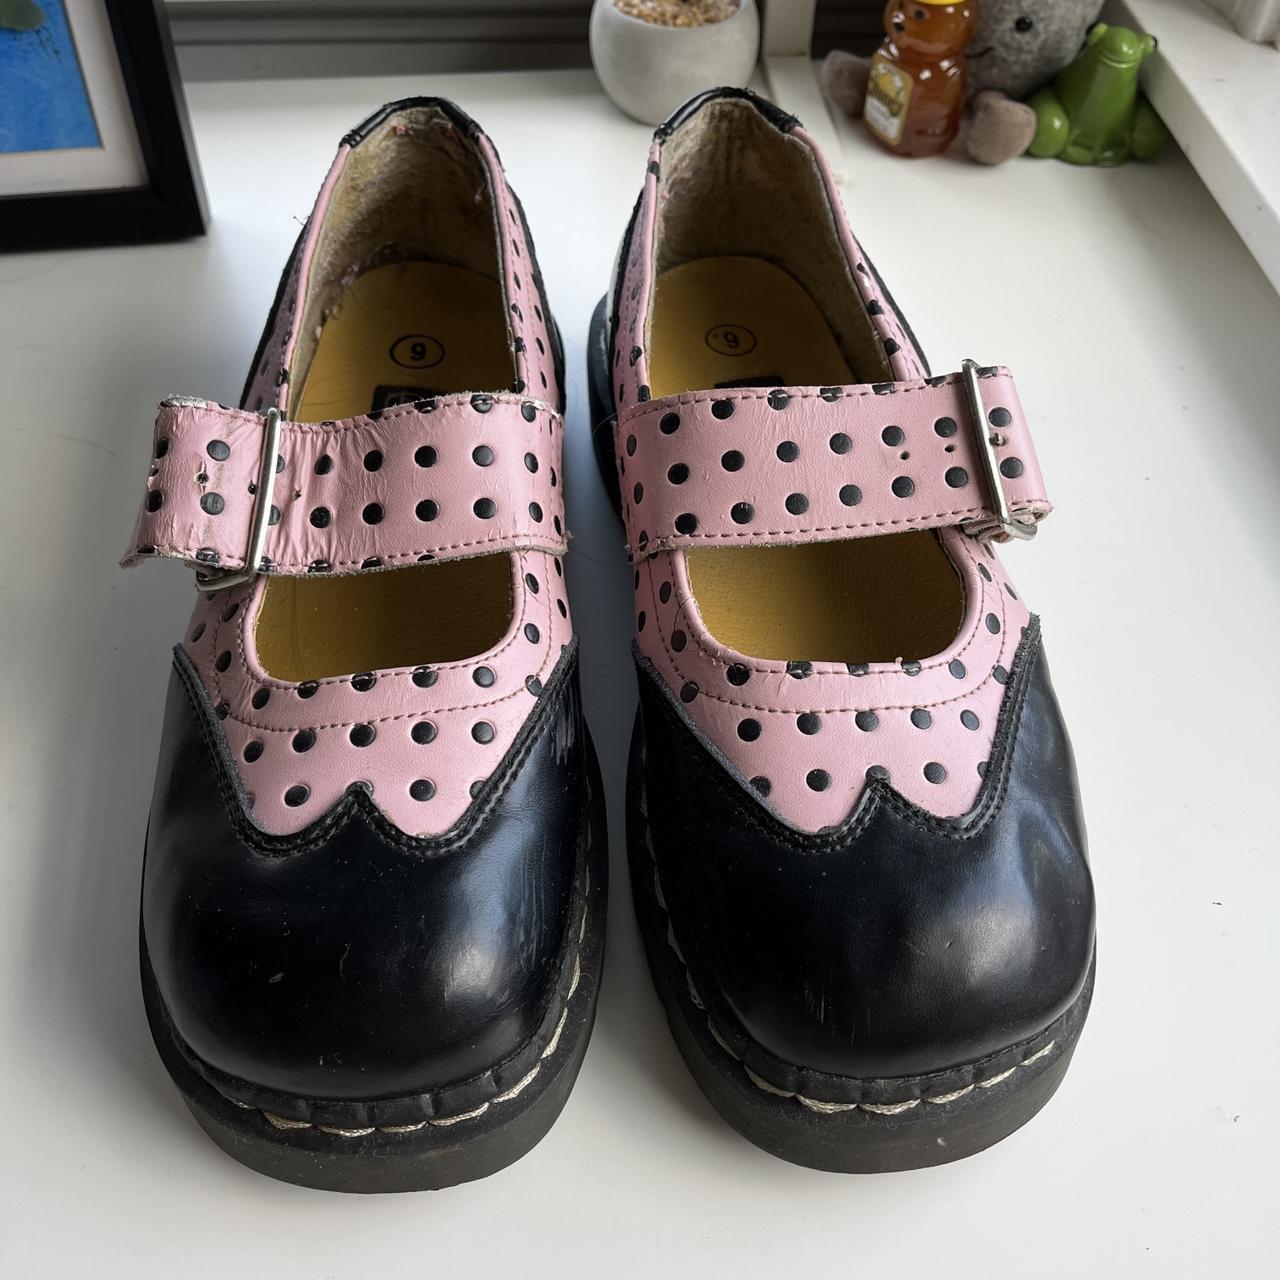 Dr. Martens Women's Black and Pink Oxfords